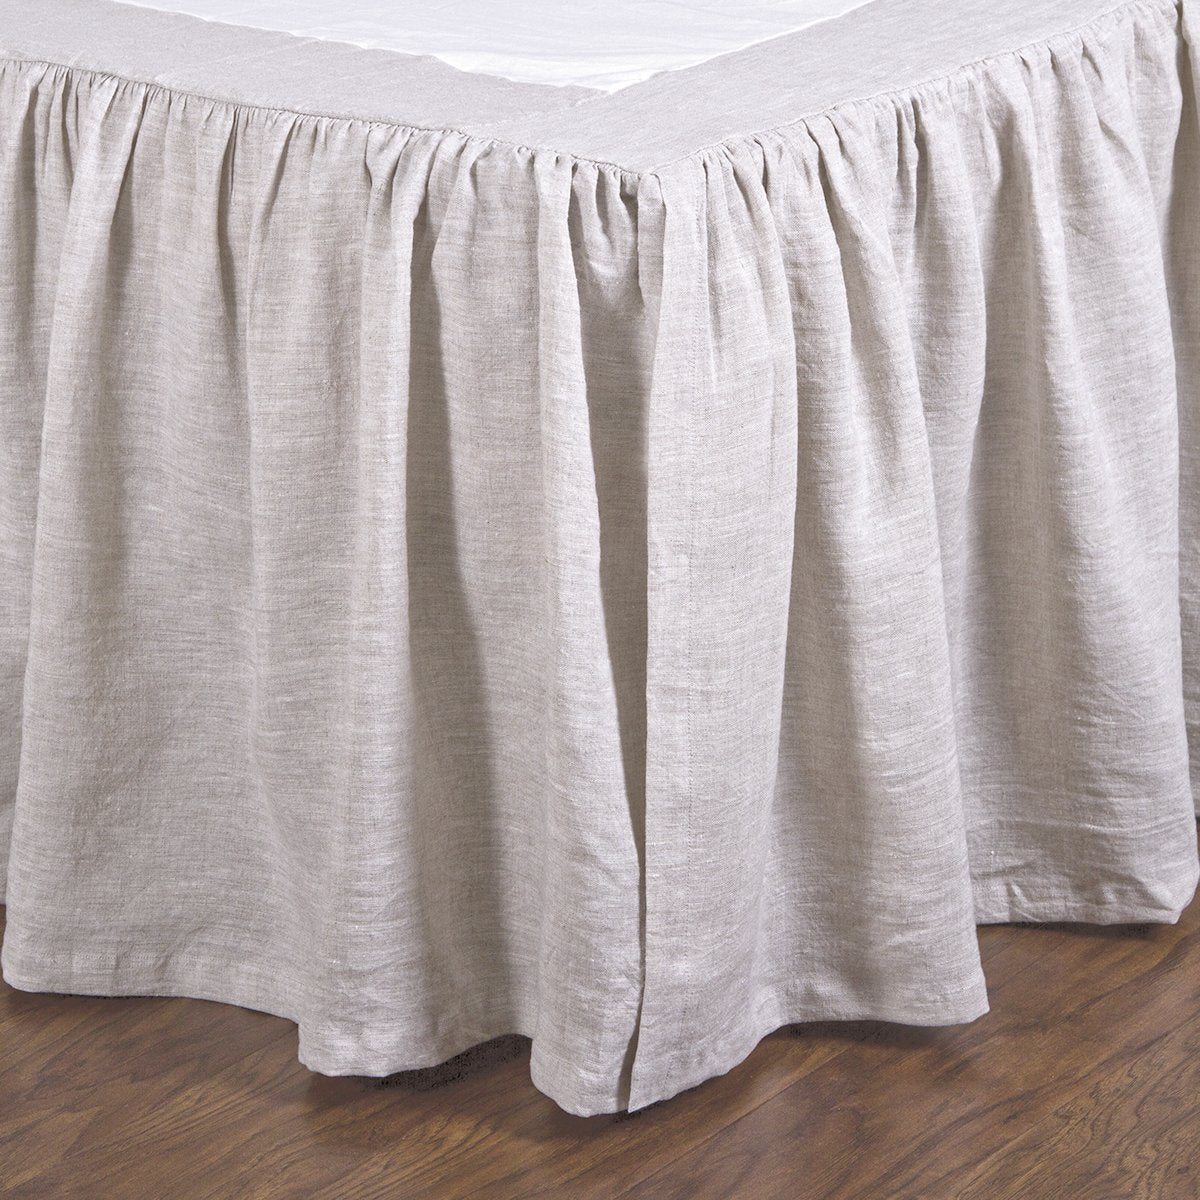 GATHERED LINEN BEDSKIRT - FLAX-Bed Skirts-Pom Pom at Home